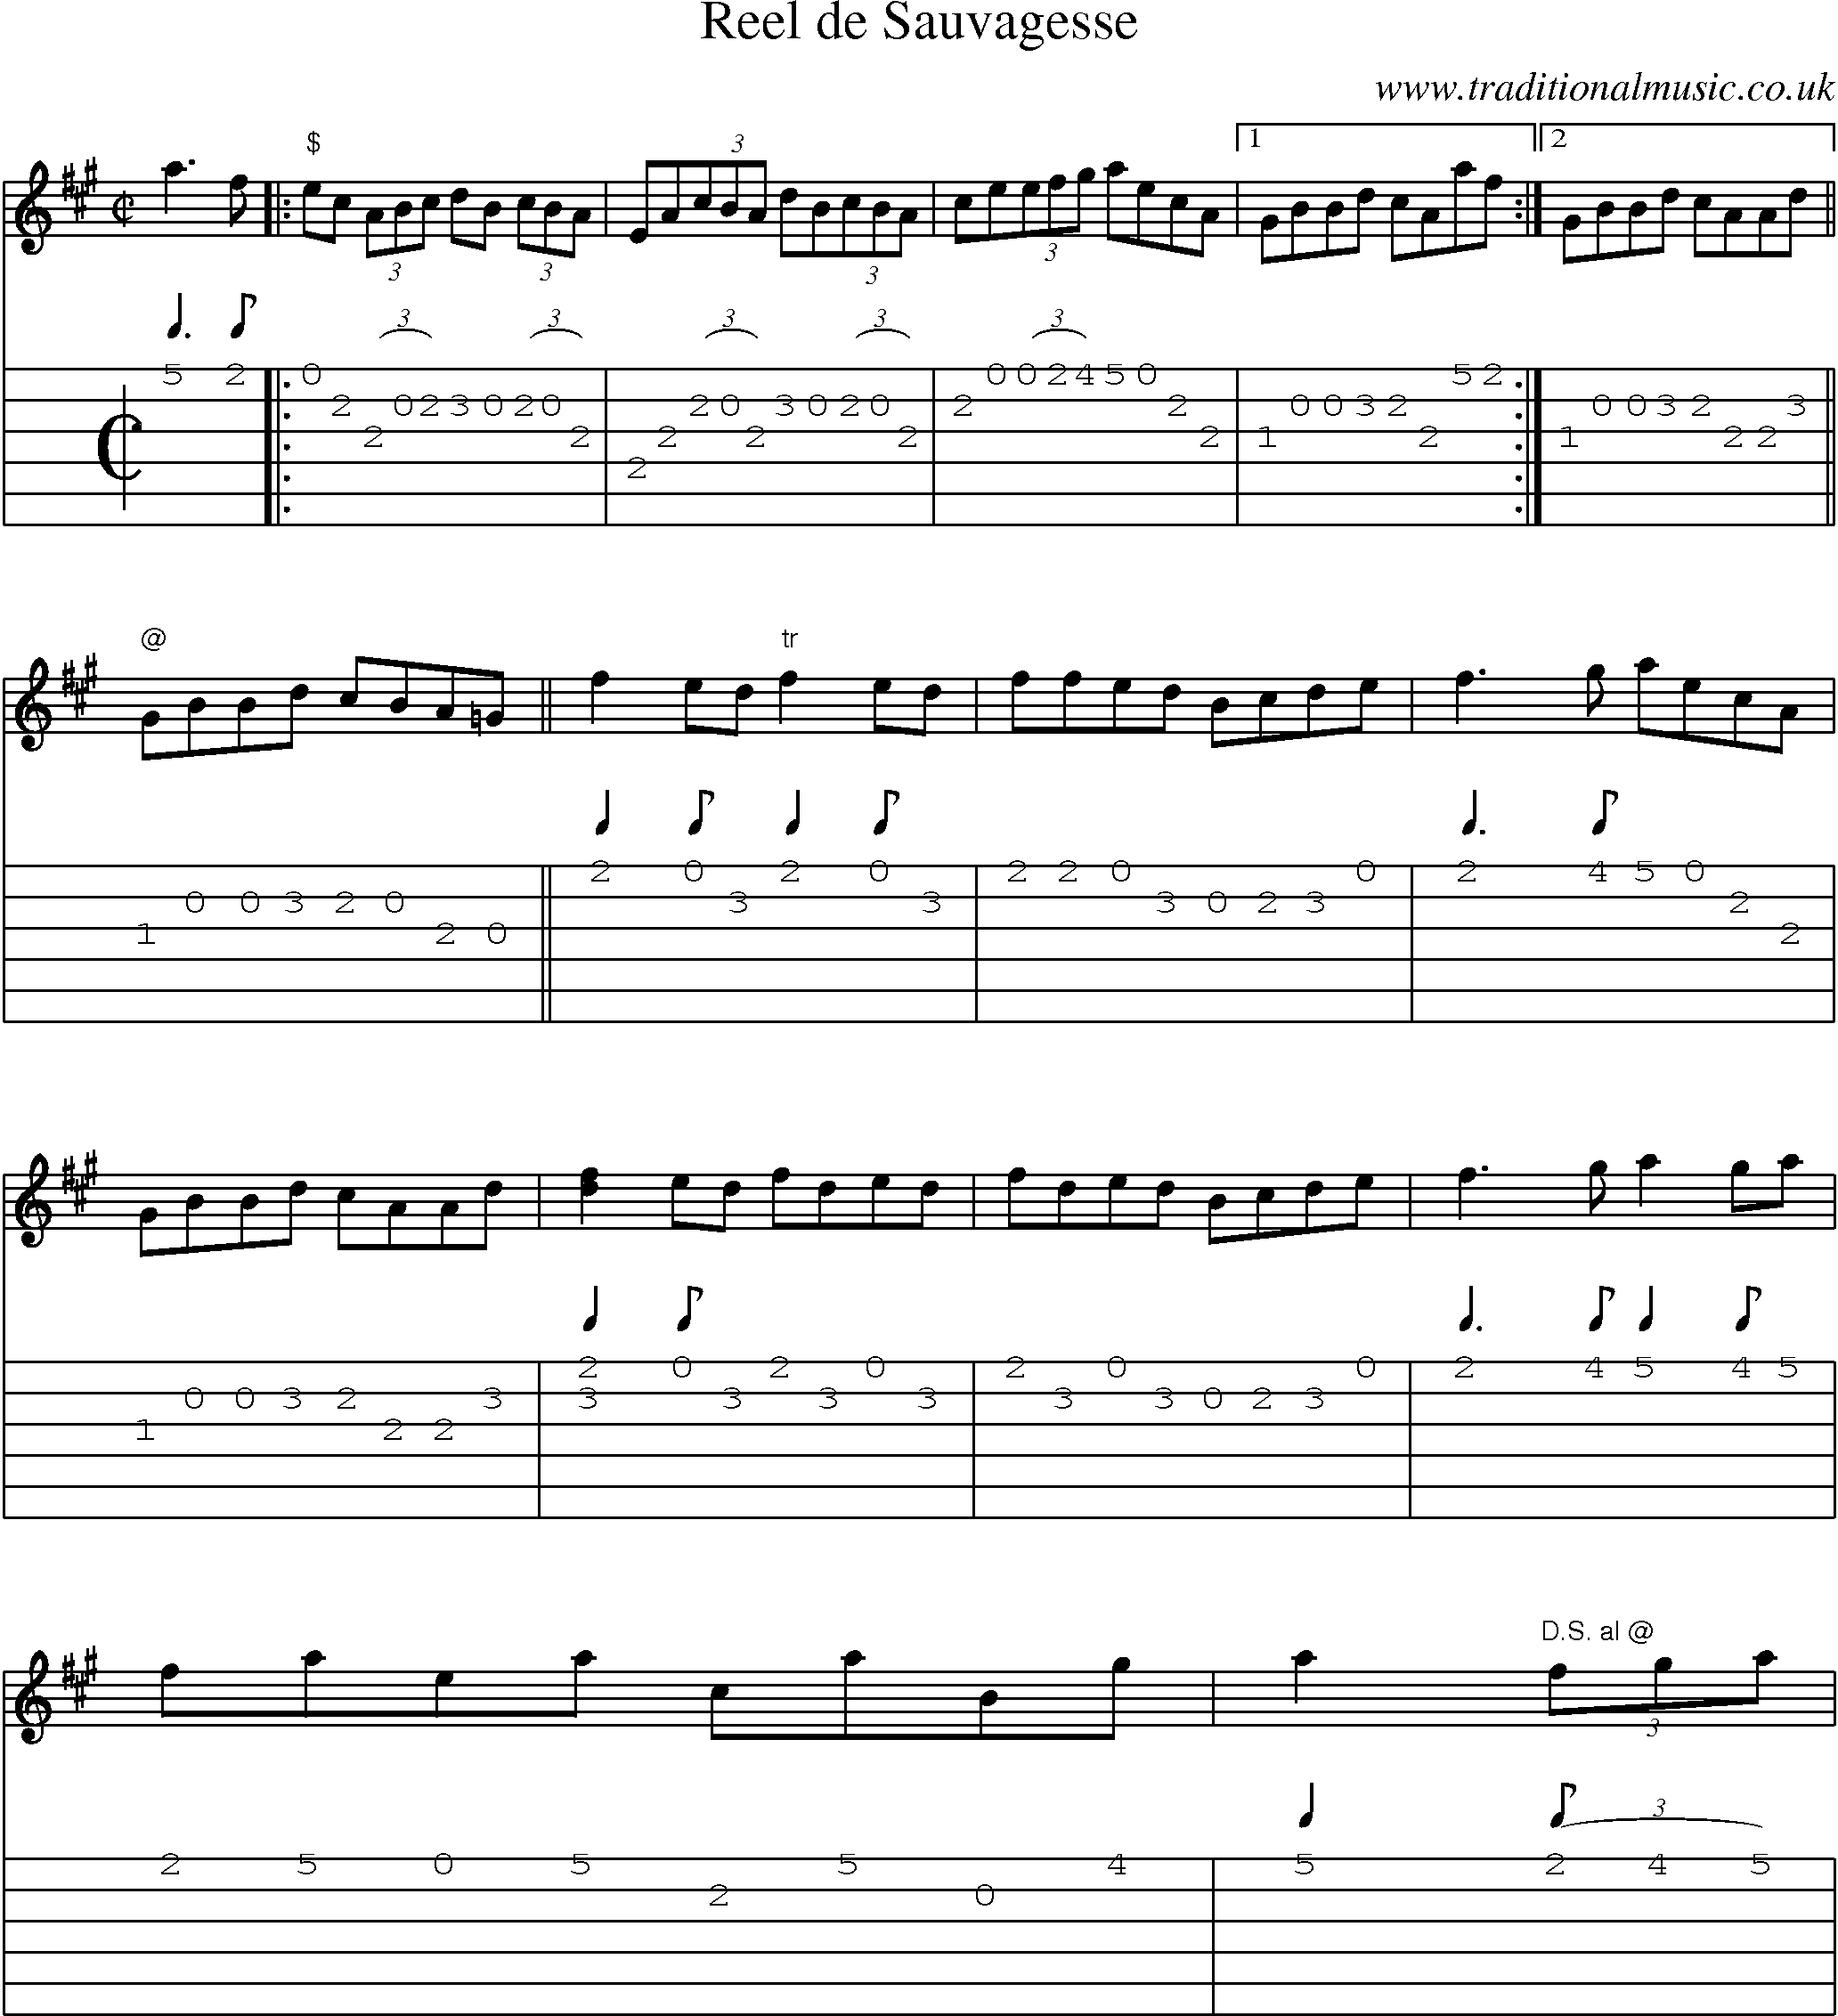 Music Score and Guitar Tabs for Reel De Sauvagesse